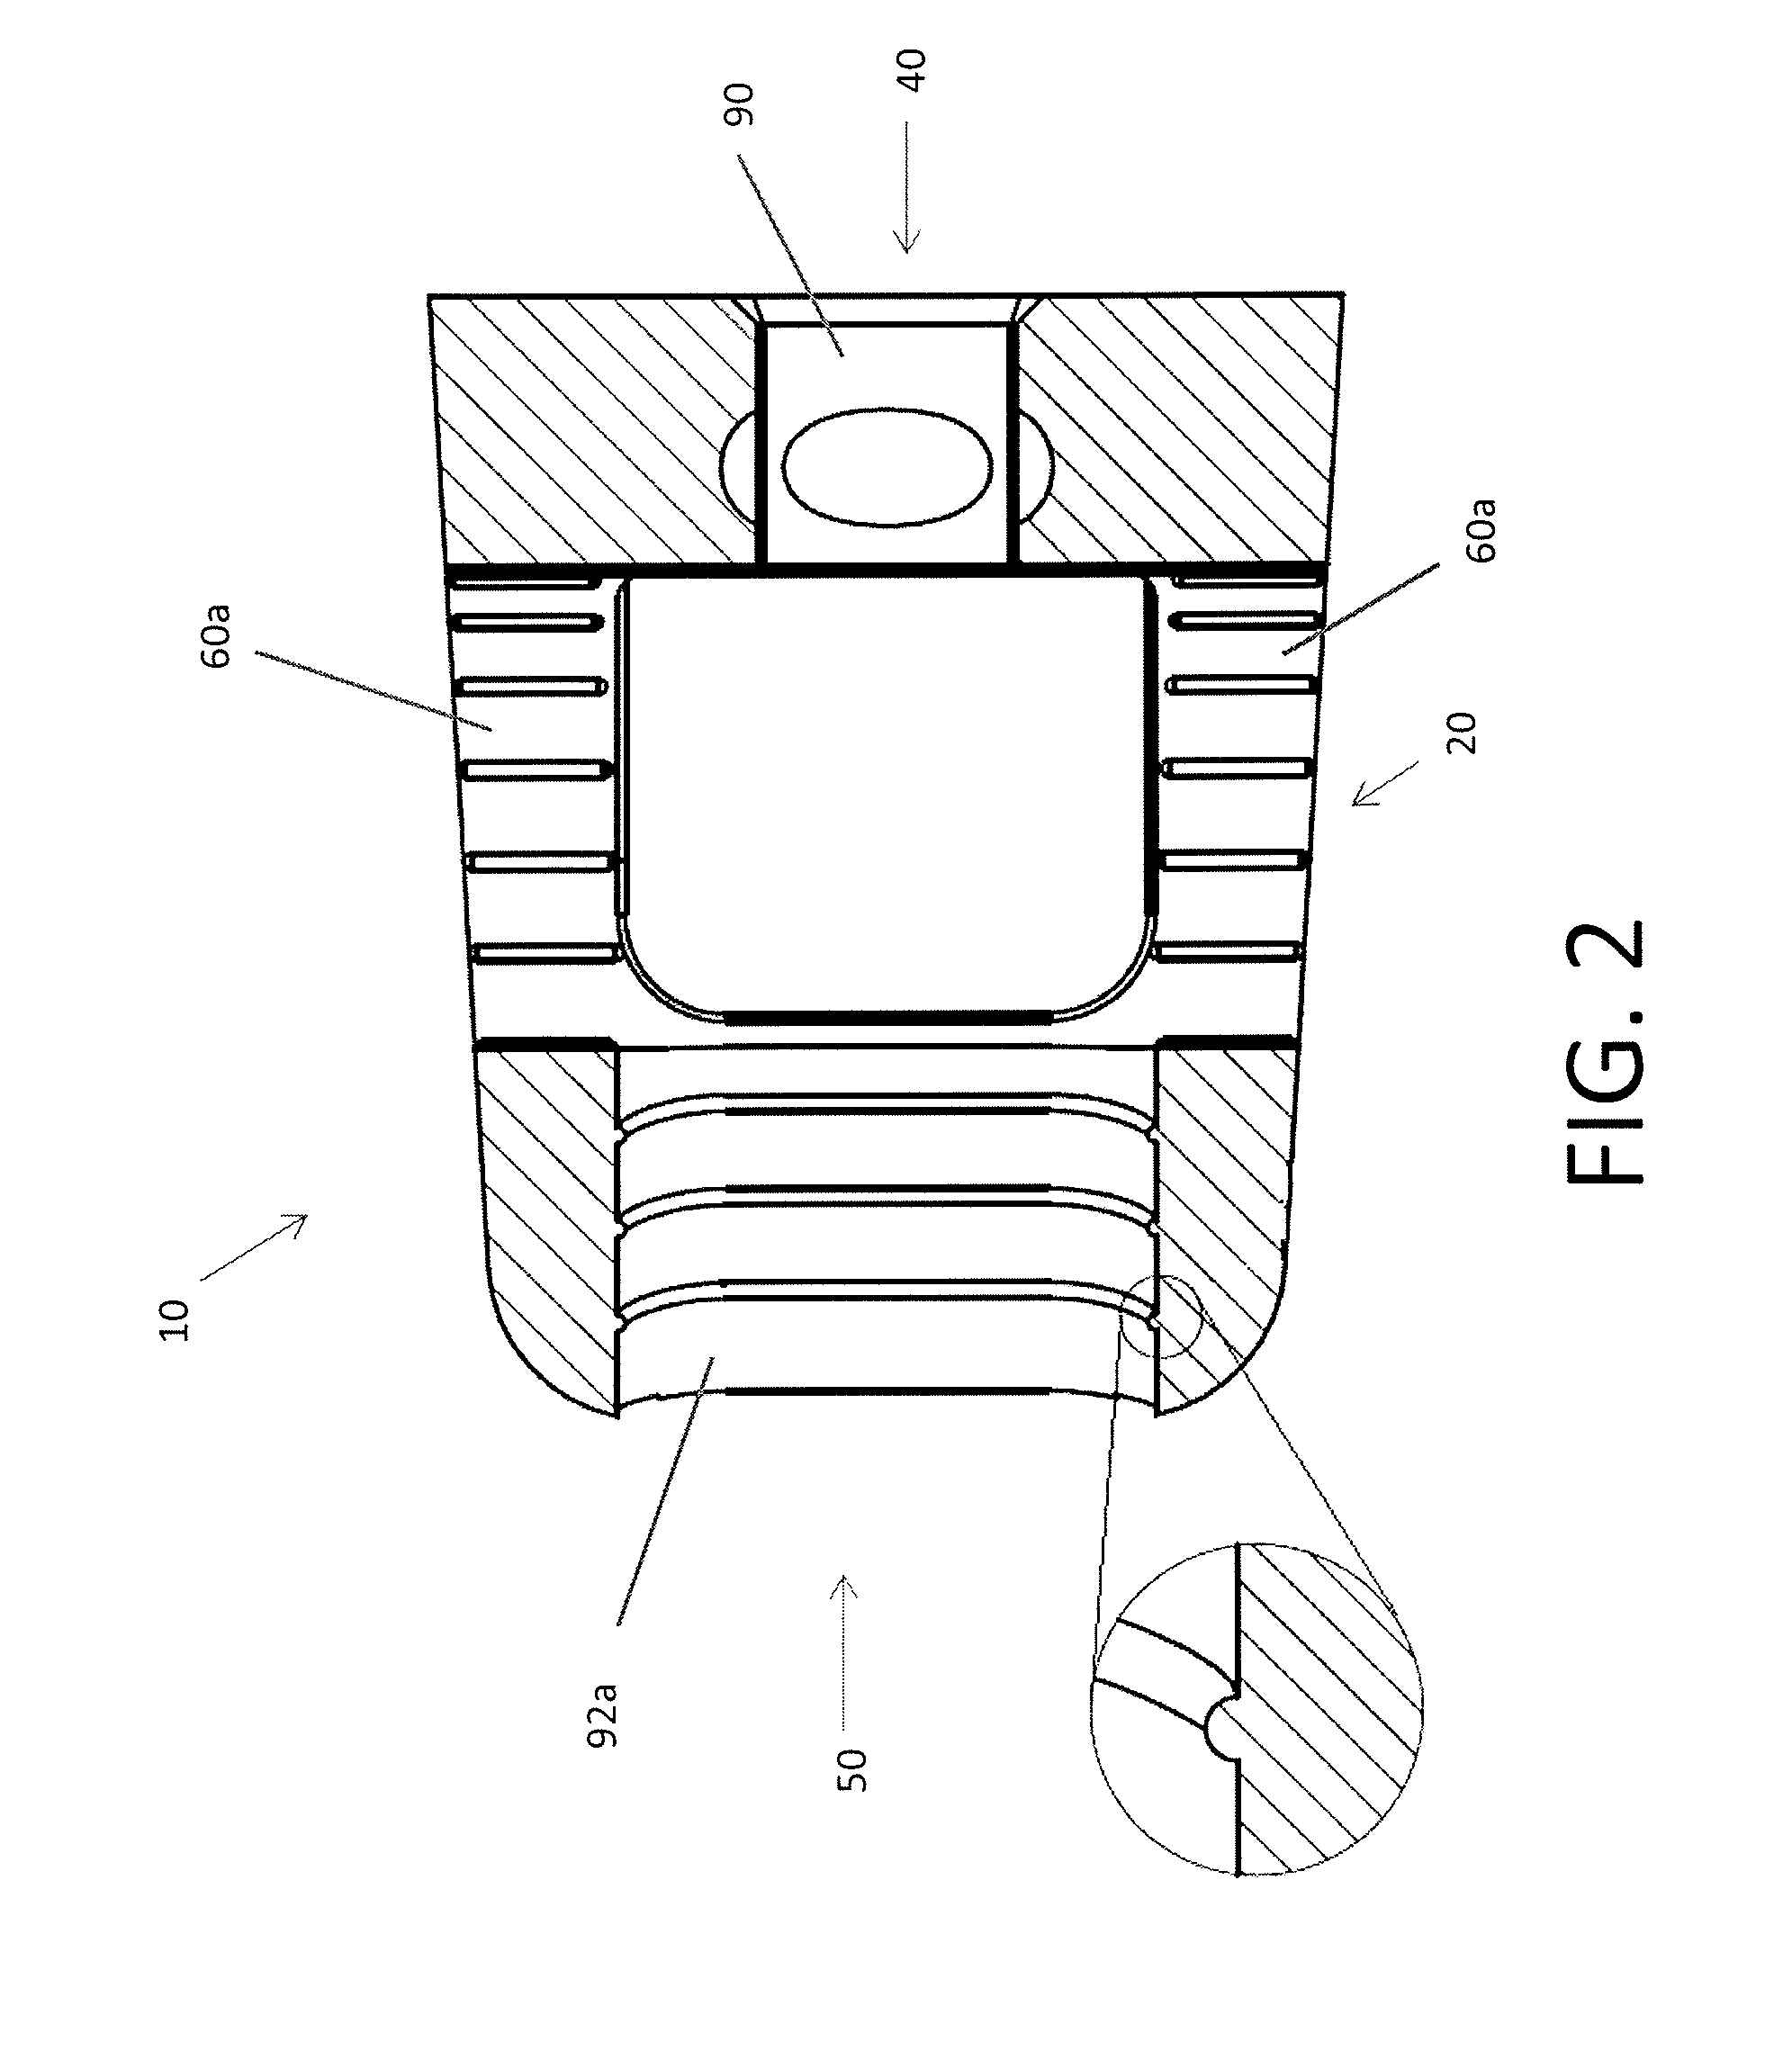 Process of fabricating implants having internal features for graft retention and load transfer between implant and vertebrae